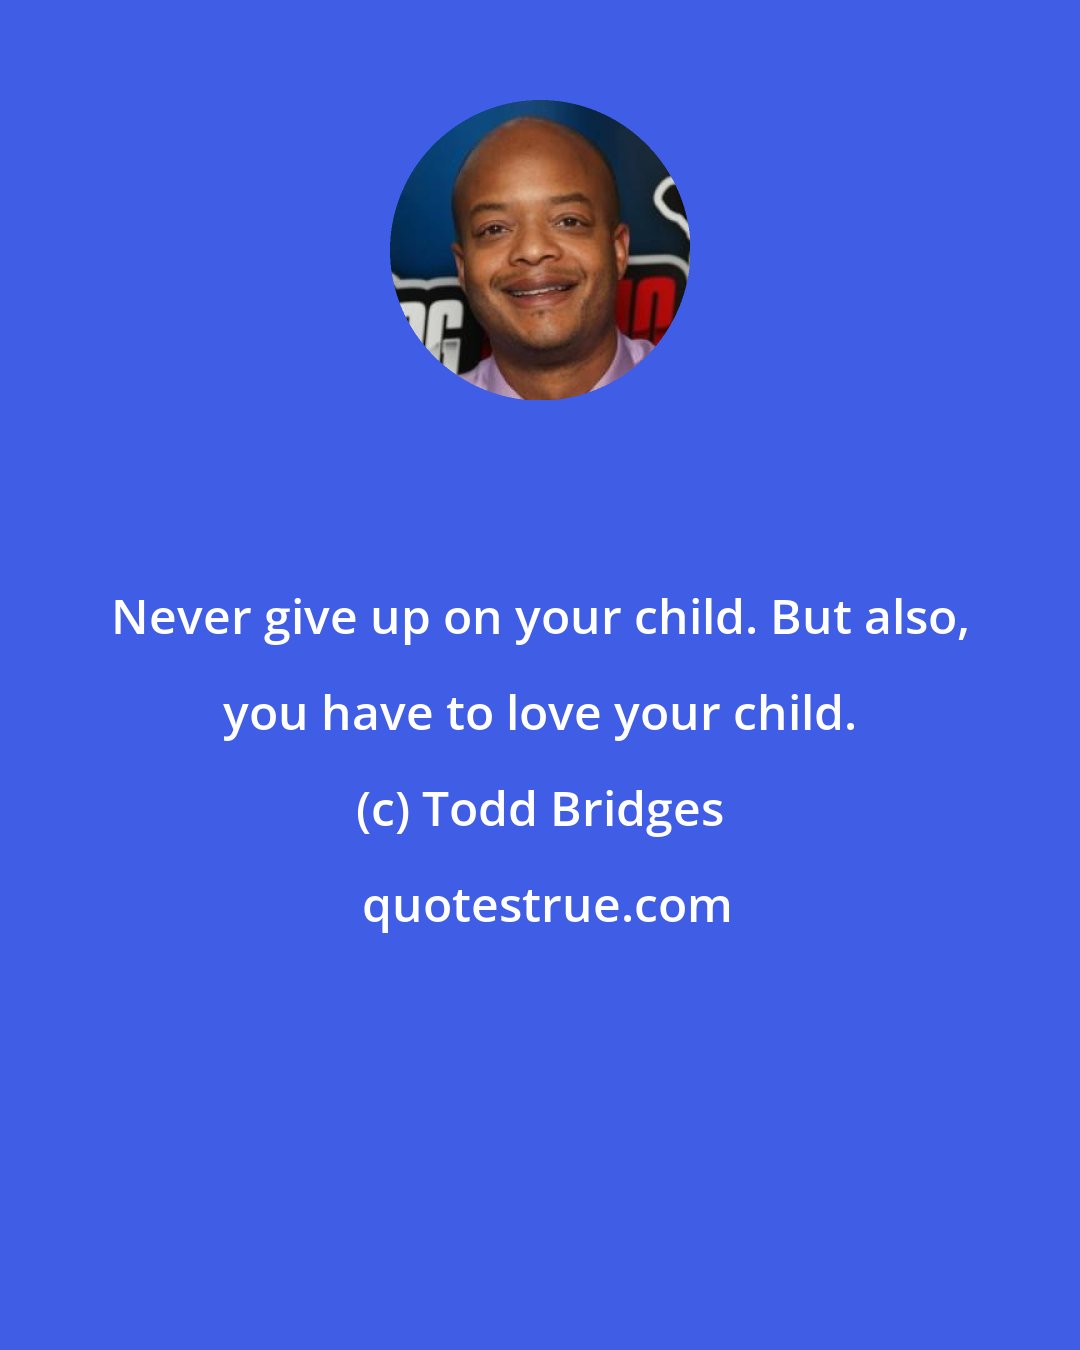 Todd Bridges: Never give up on your child. But also, you have to love your child.